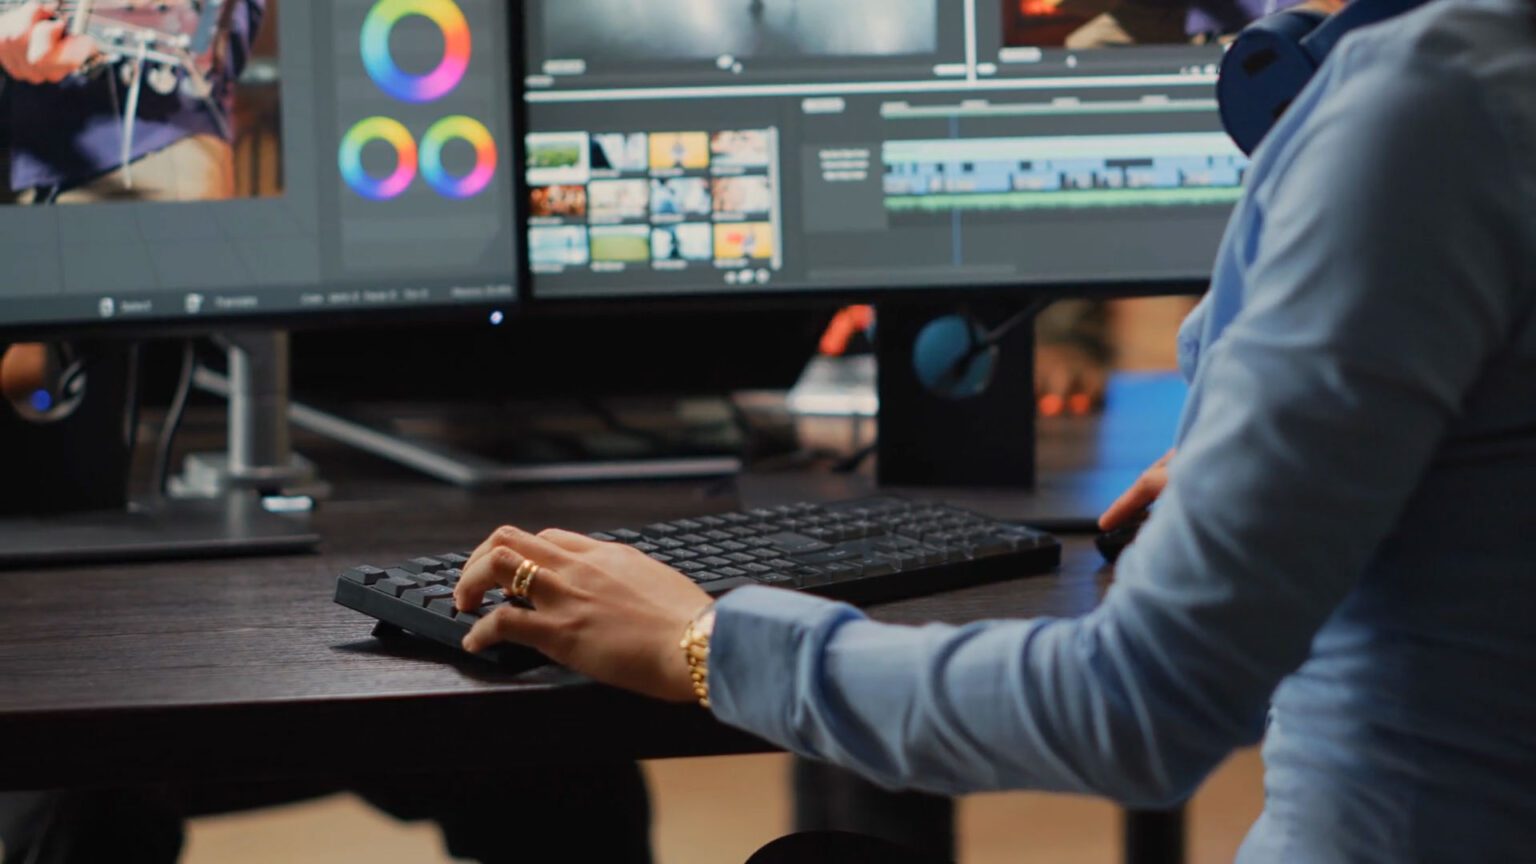 Breaking down the main things to consider with DaVinci Resolve vs Premiere Pro